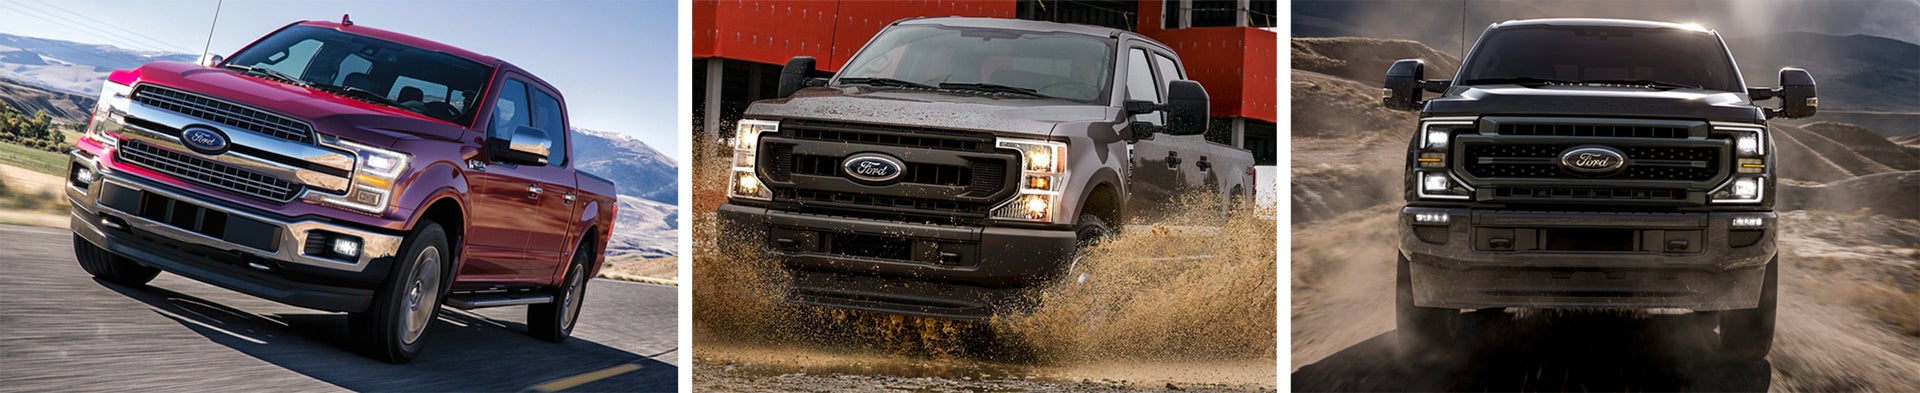 2020 Ford Truck Models